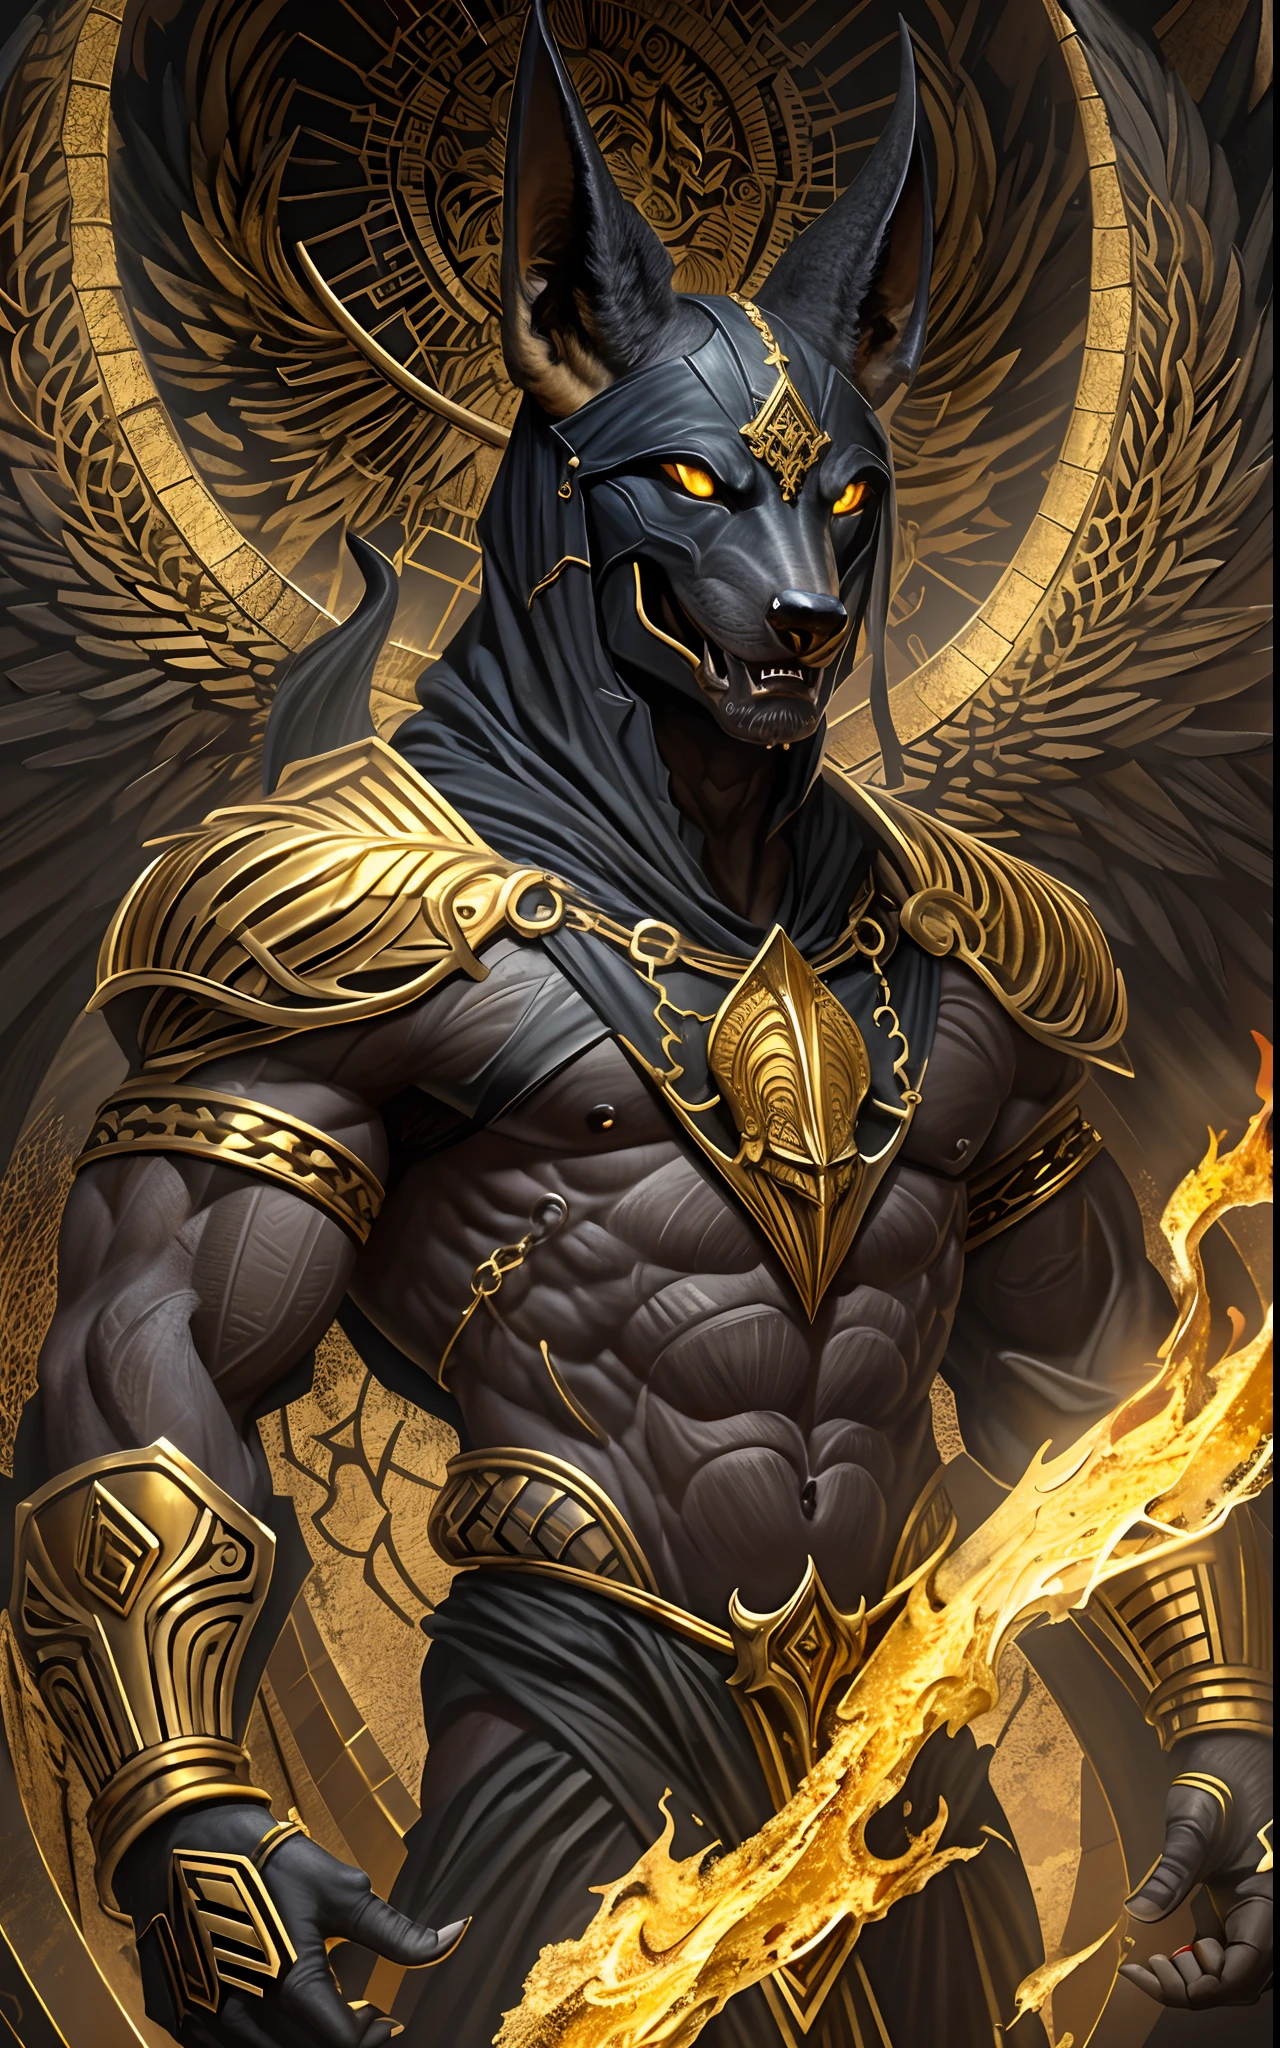 (high quality), photorealistic, (oil painting)
jewelry, (solo),
(dynamic pose), towards right, ((hell gate)), fire, hell landscape, (the underworld), (dark landscape),
anubis, egyptian jackal headed god, anthro, muscular, (holding golden scales), dynamic pose, cinematic, dramatic camera angle, golden armor:0.25, black & gold cape, (good anatomy), (good proportions), award winning, masterpiece, centered,